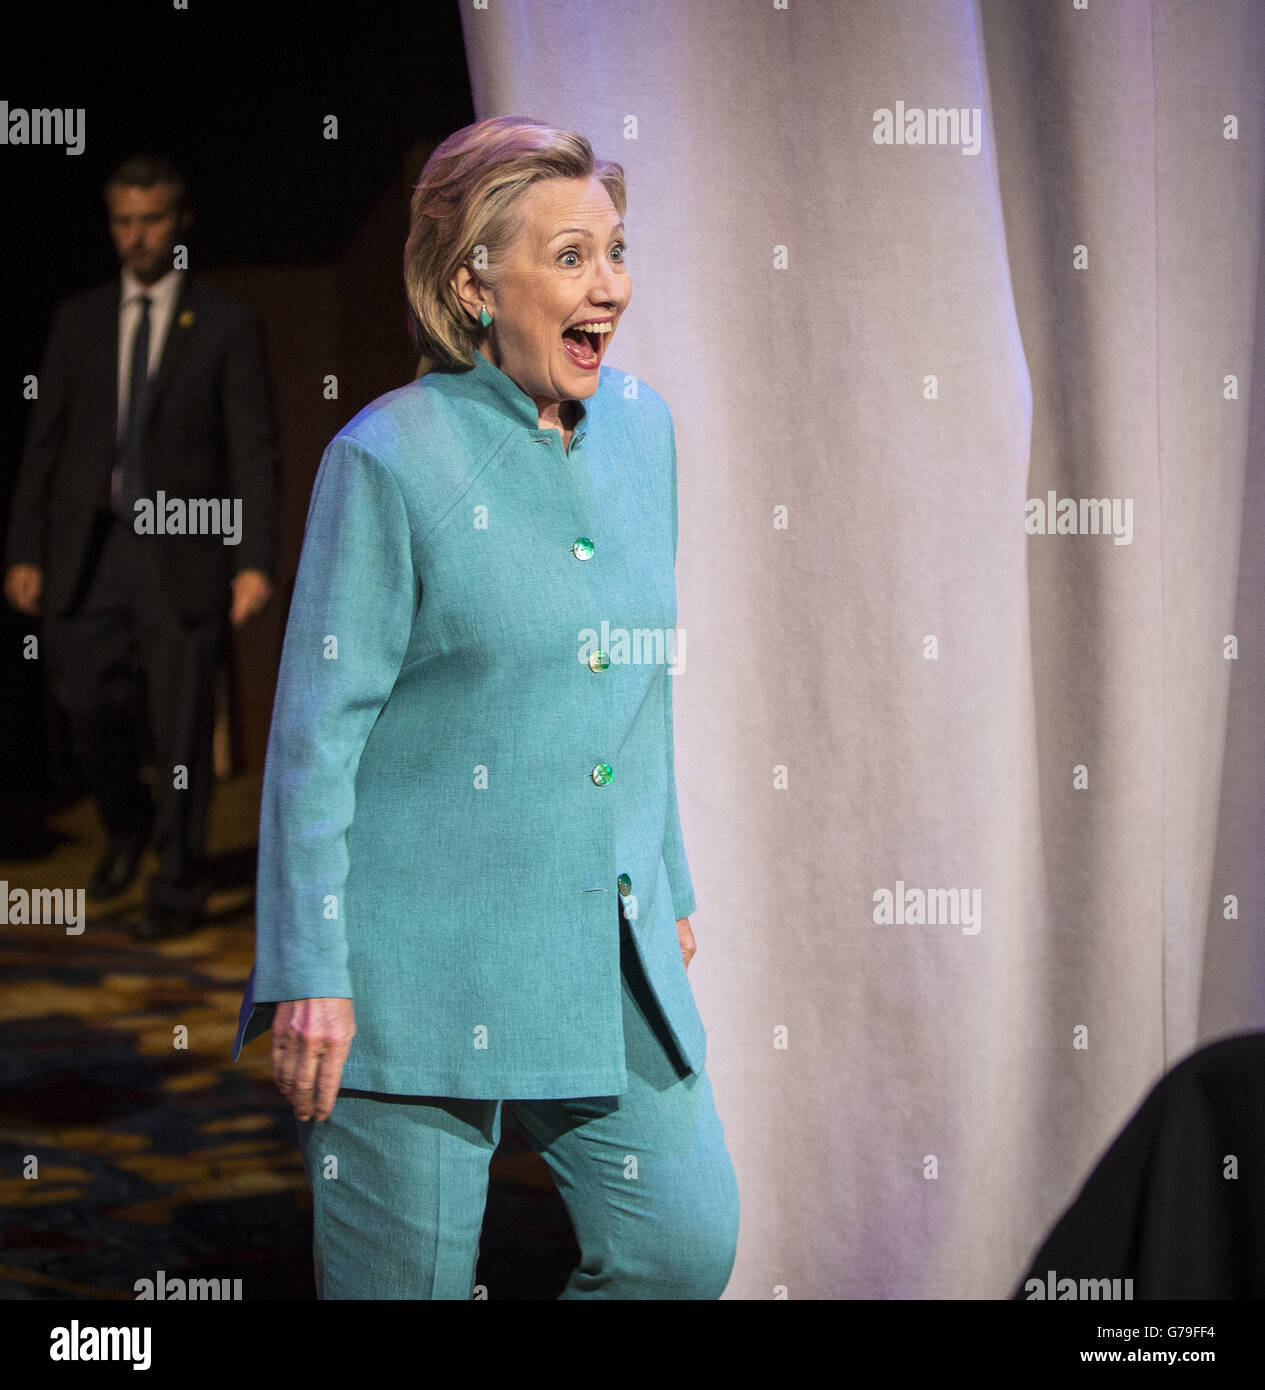 Indianapolis, Indiana, USA. 26th June, 2016. Presumptive Democratic presidential nominee HILLARY CLINTON spoke at the U.S. Conference of Mayors in Indianapolis, Indiana on Sunday, June 26, 2016 Credit:  Lora Olive/ZUMA Wire/Alamy Live News Stock Photo